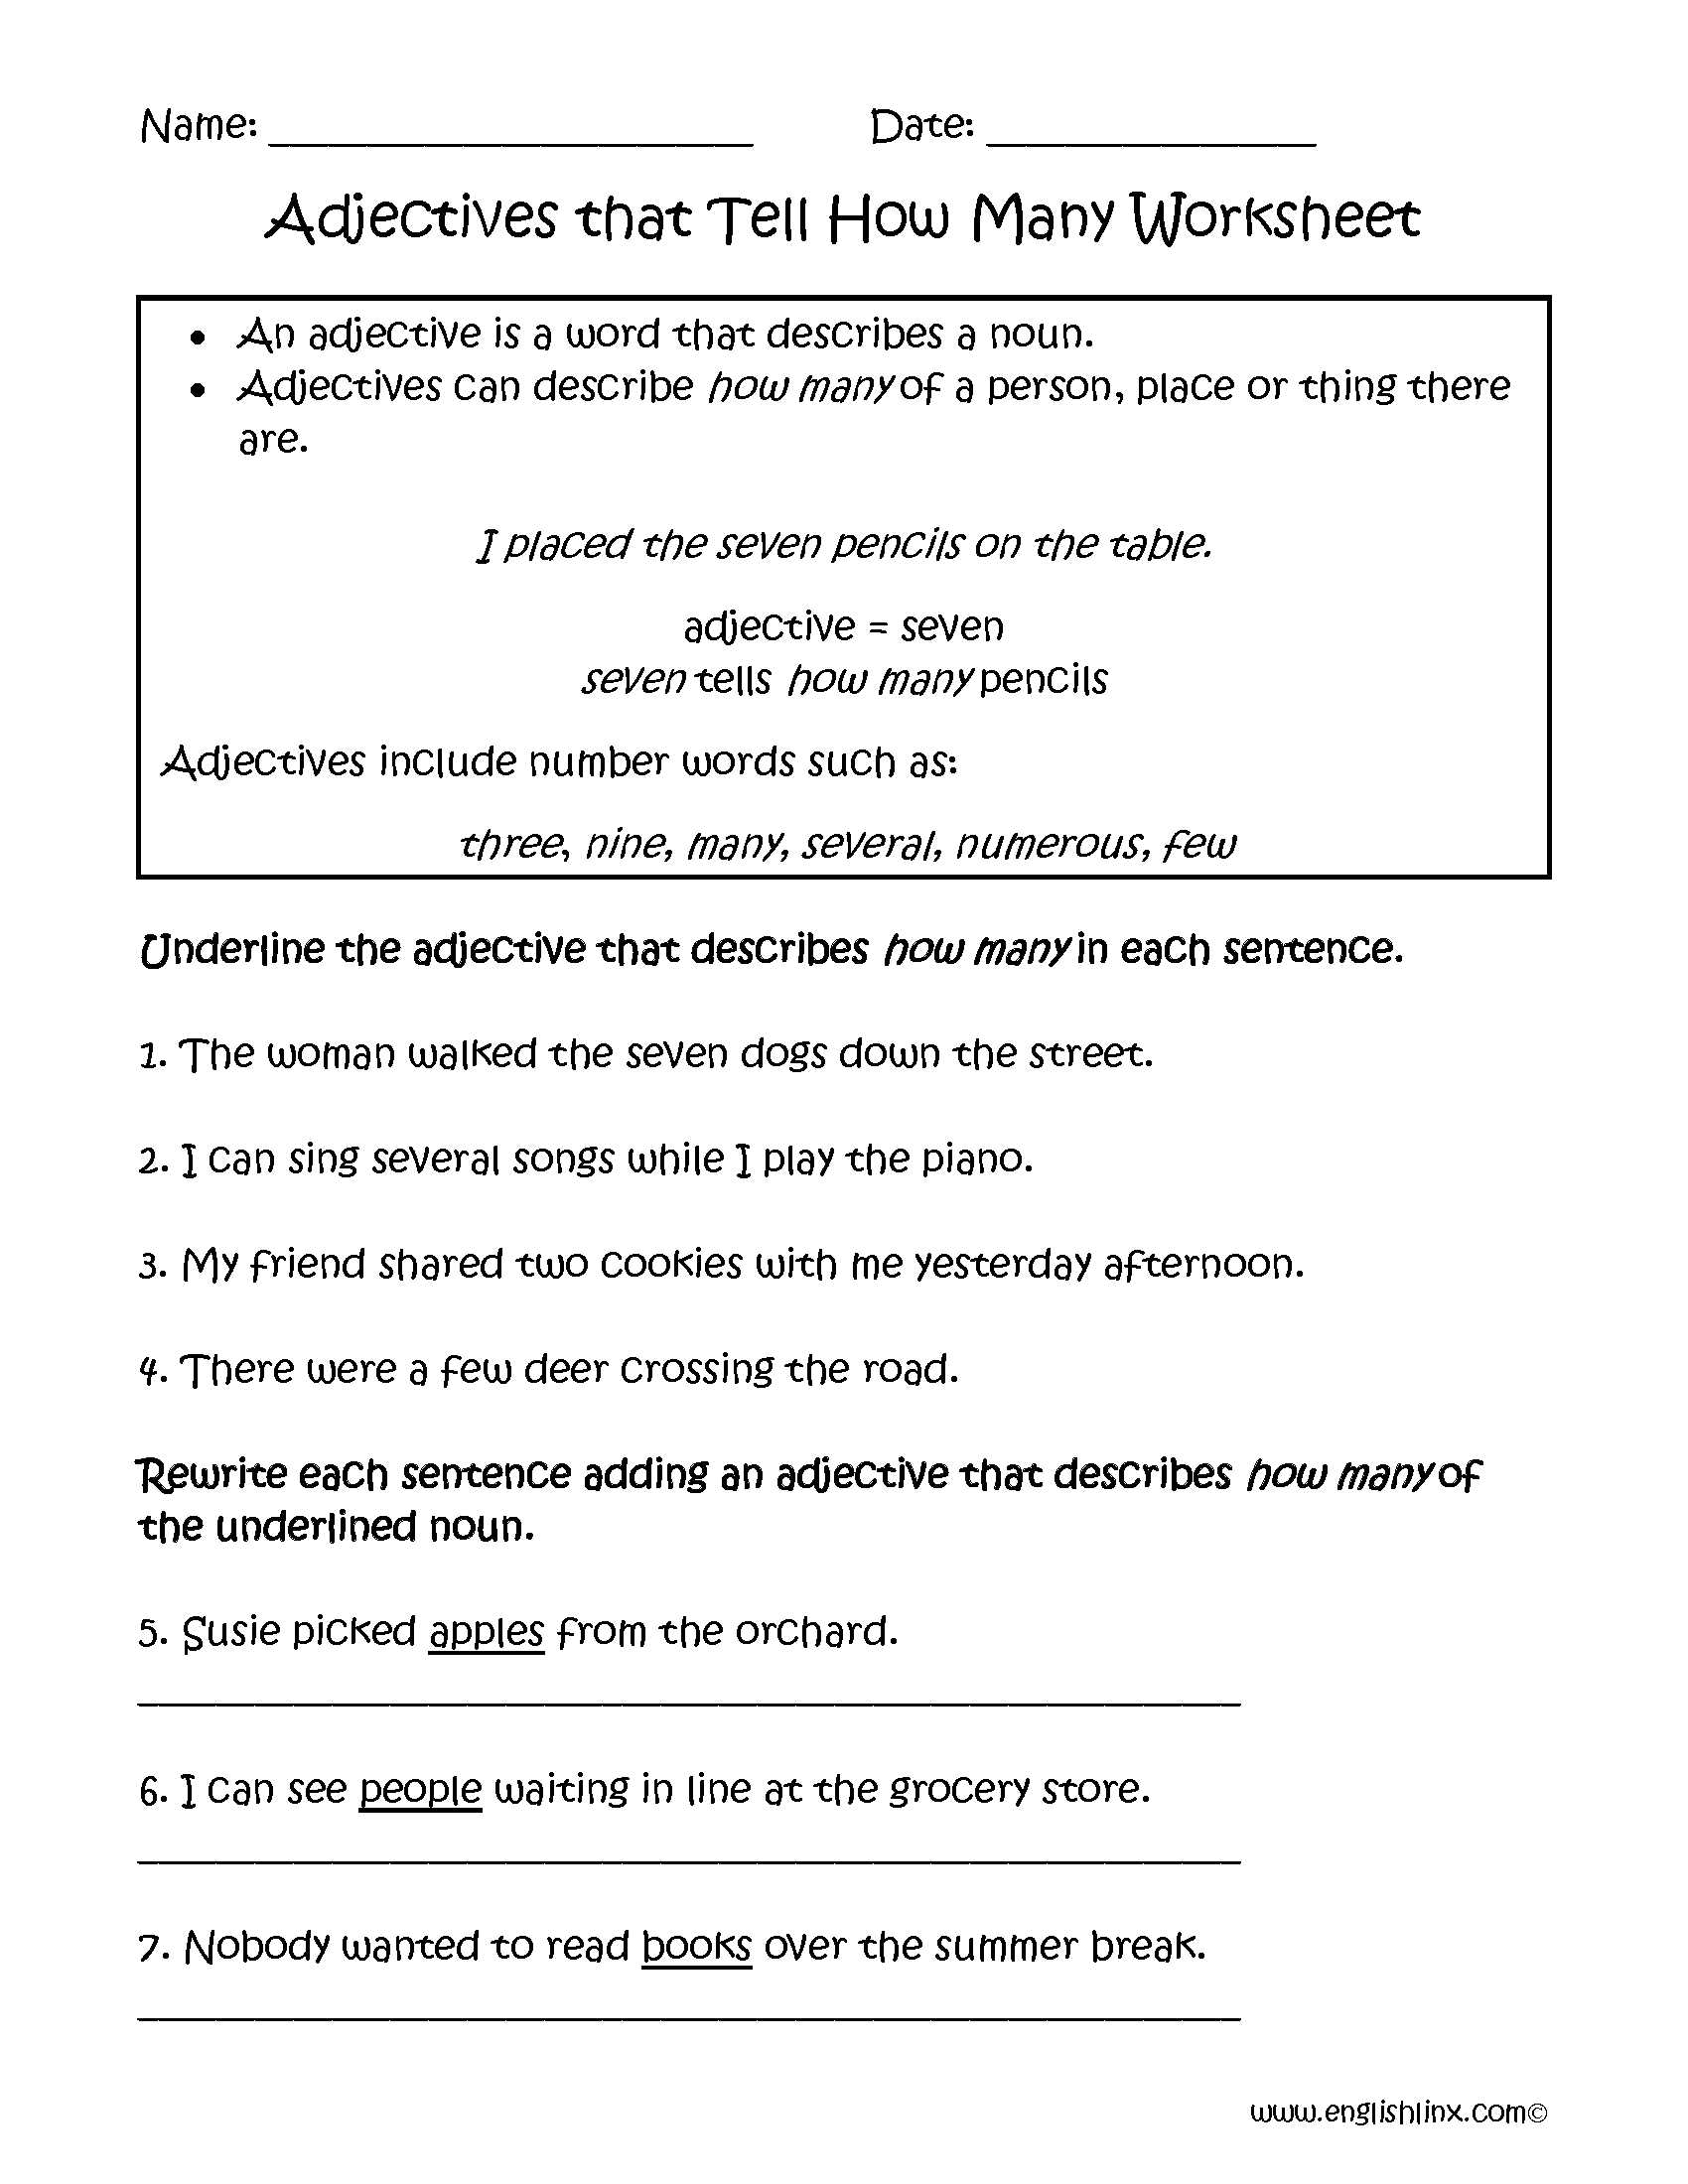 Simple Subject and Predicate Worksheets together with Adjectives Tell How Many Worksheets